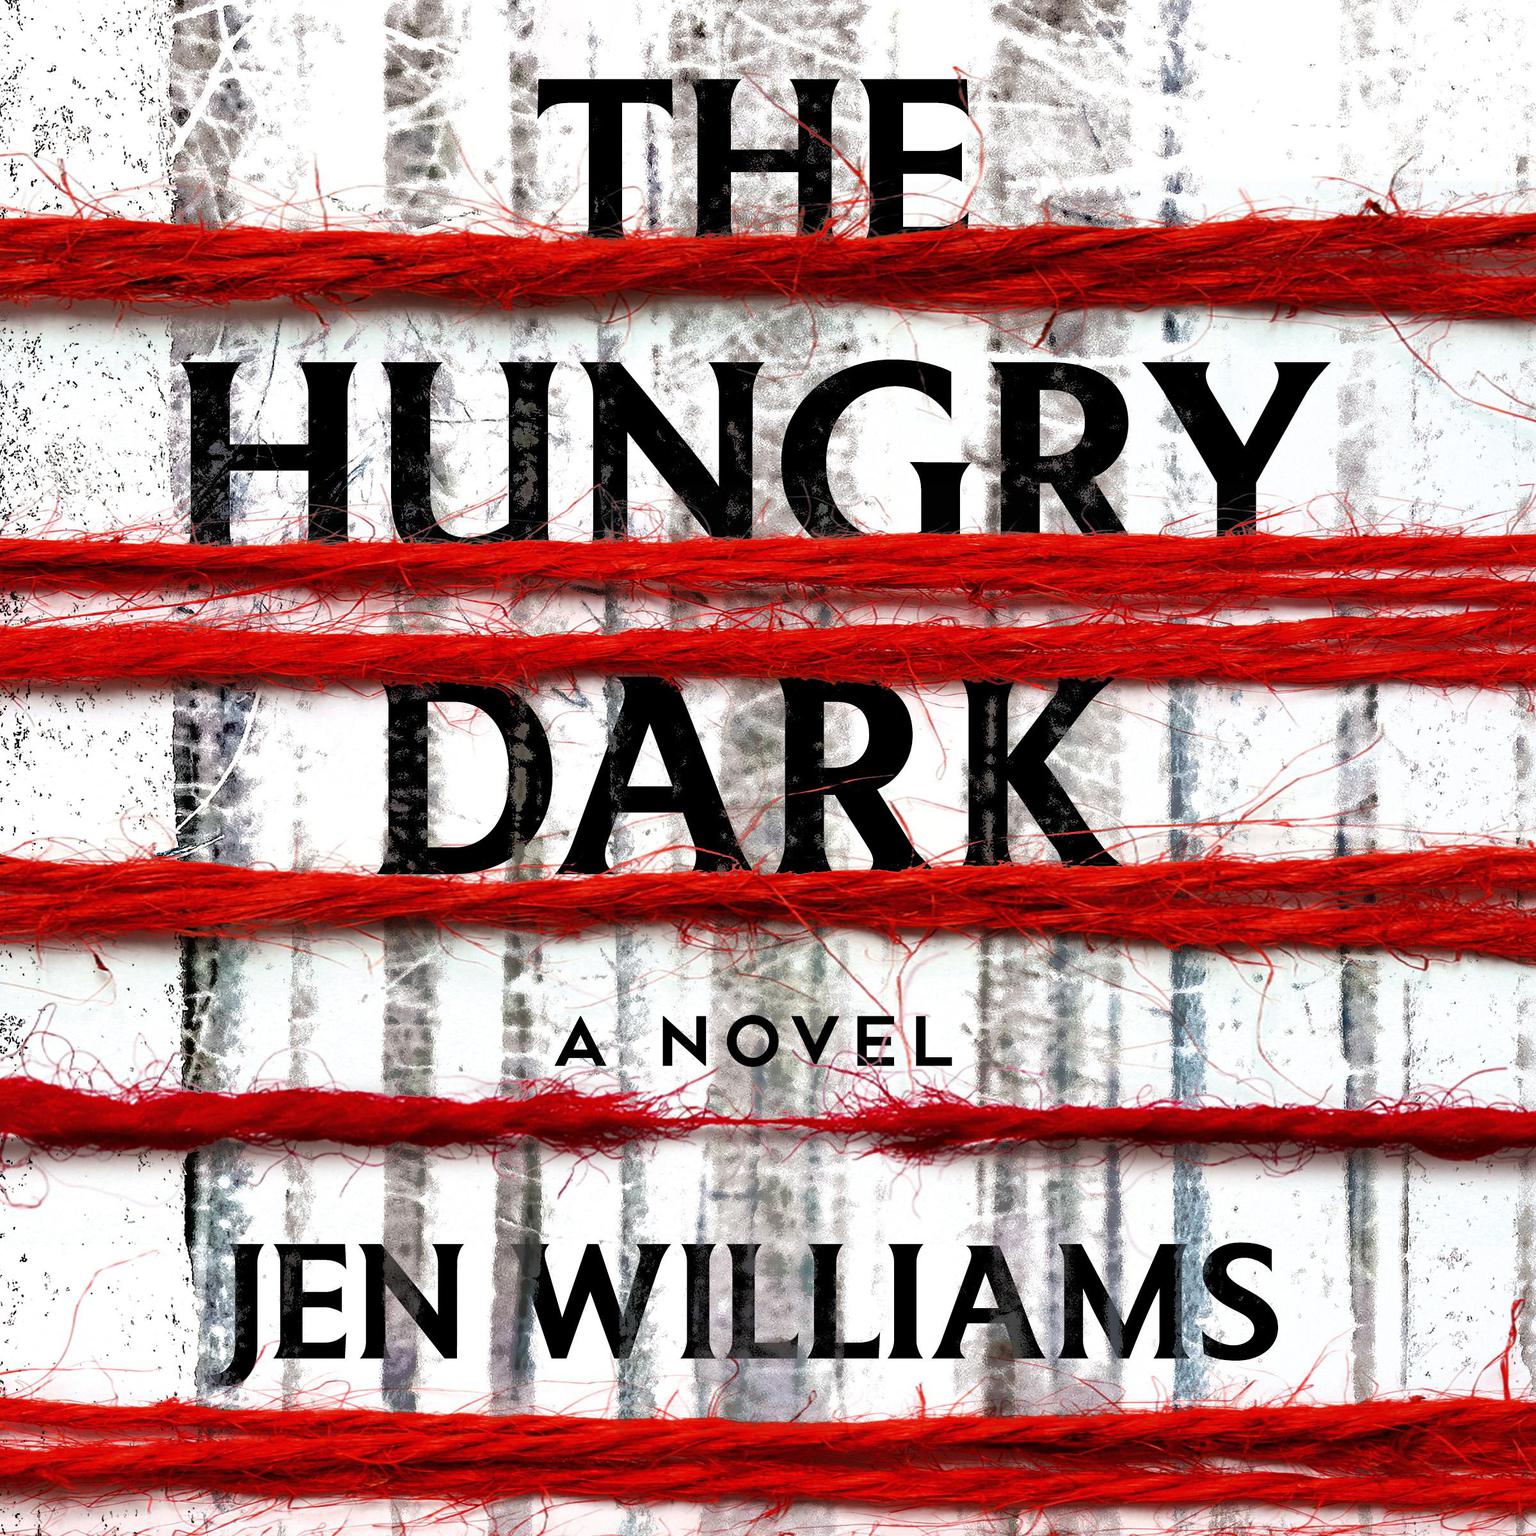 The Hungry Dark Audiobook, by Jen Williams